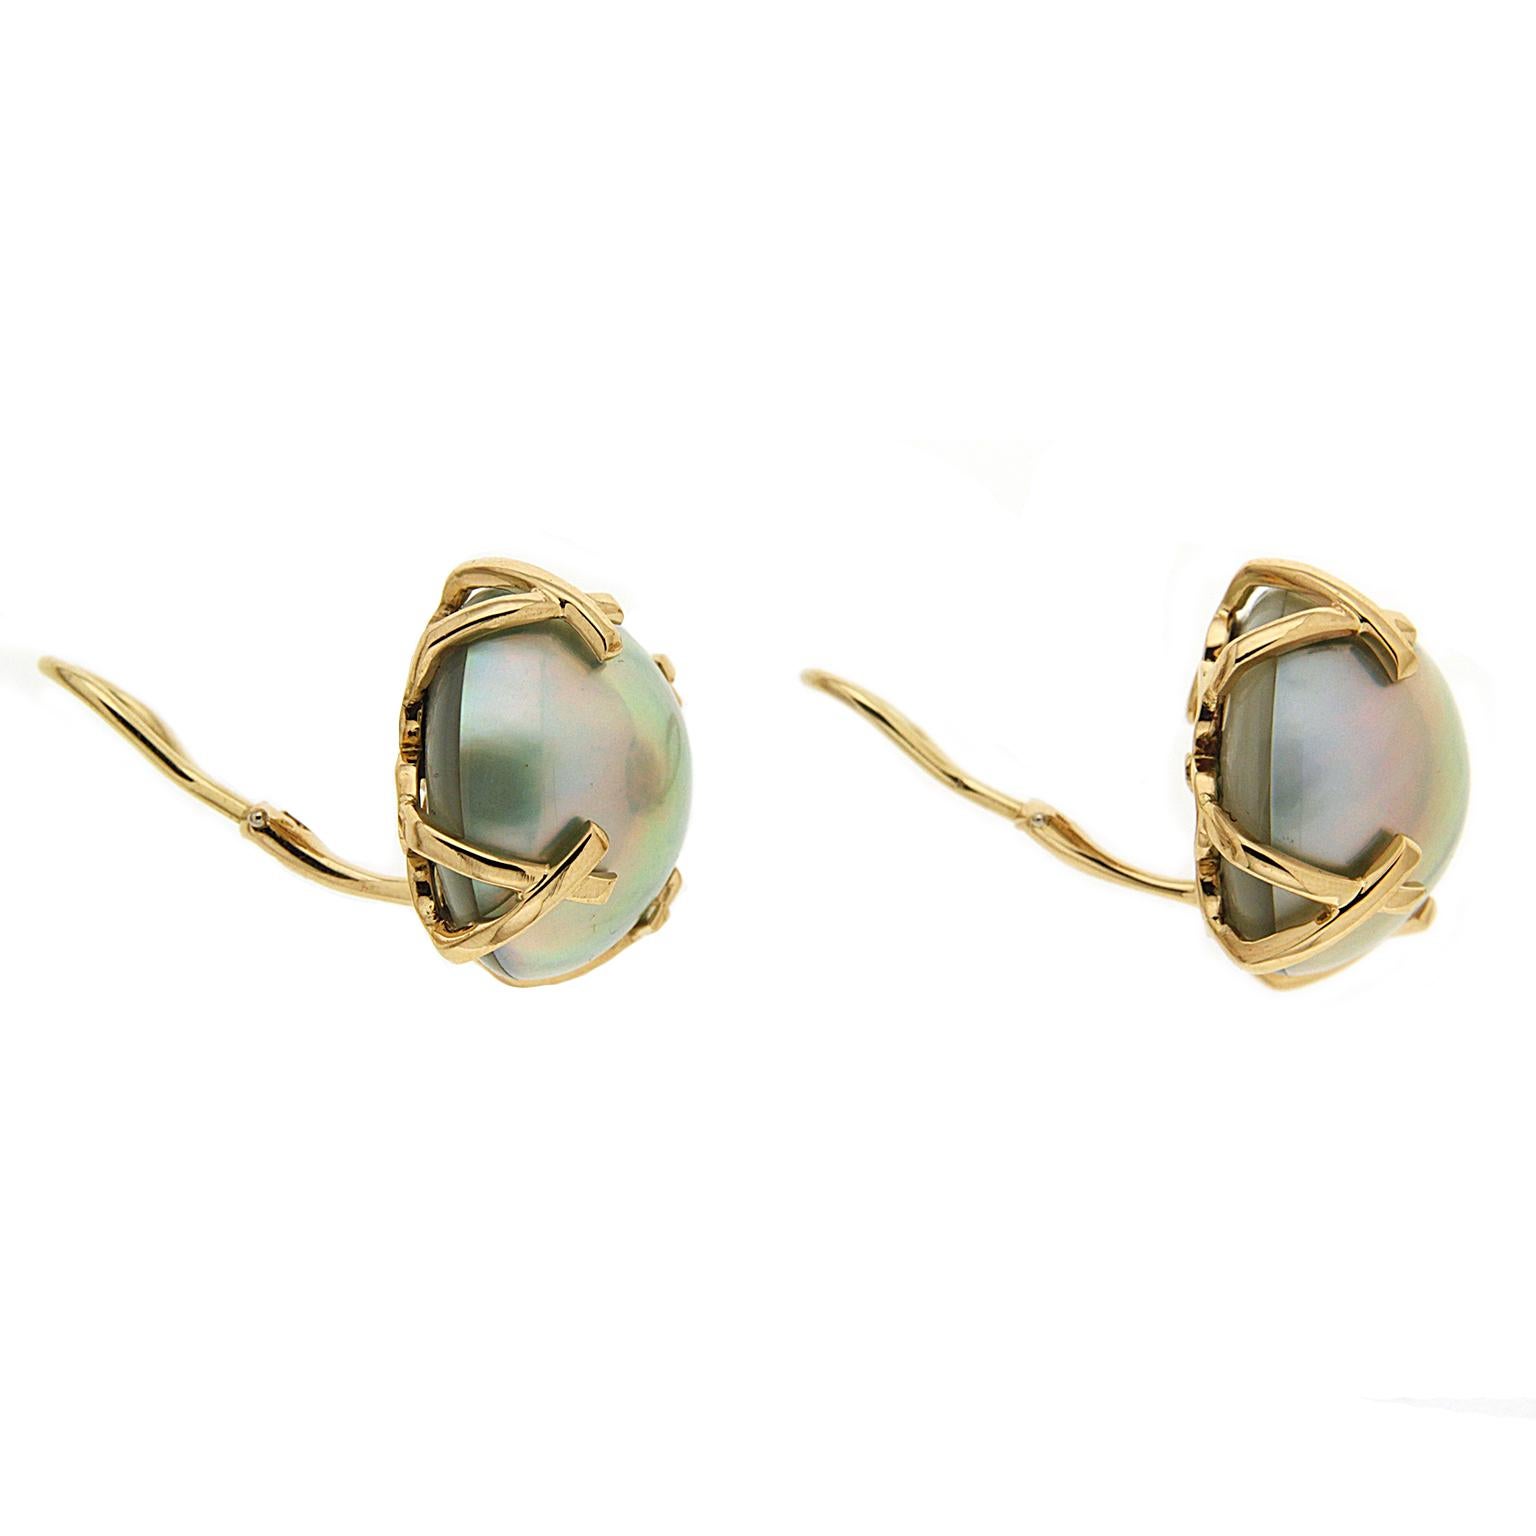 Valentin Magro 20mm Mabe Pearl Earrings play with warm and neutral shades. Their rosy overtones add depth to their overall gray bodycolor. The pearls’ bright reflections indicate strong luster and high nacre quality. X-shaped prongs in 18k yellow